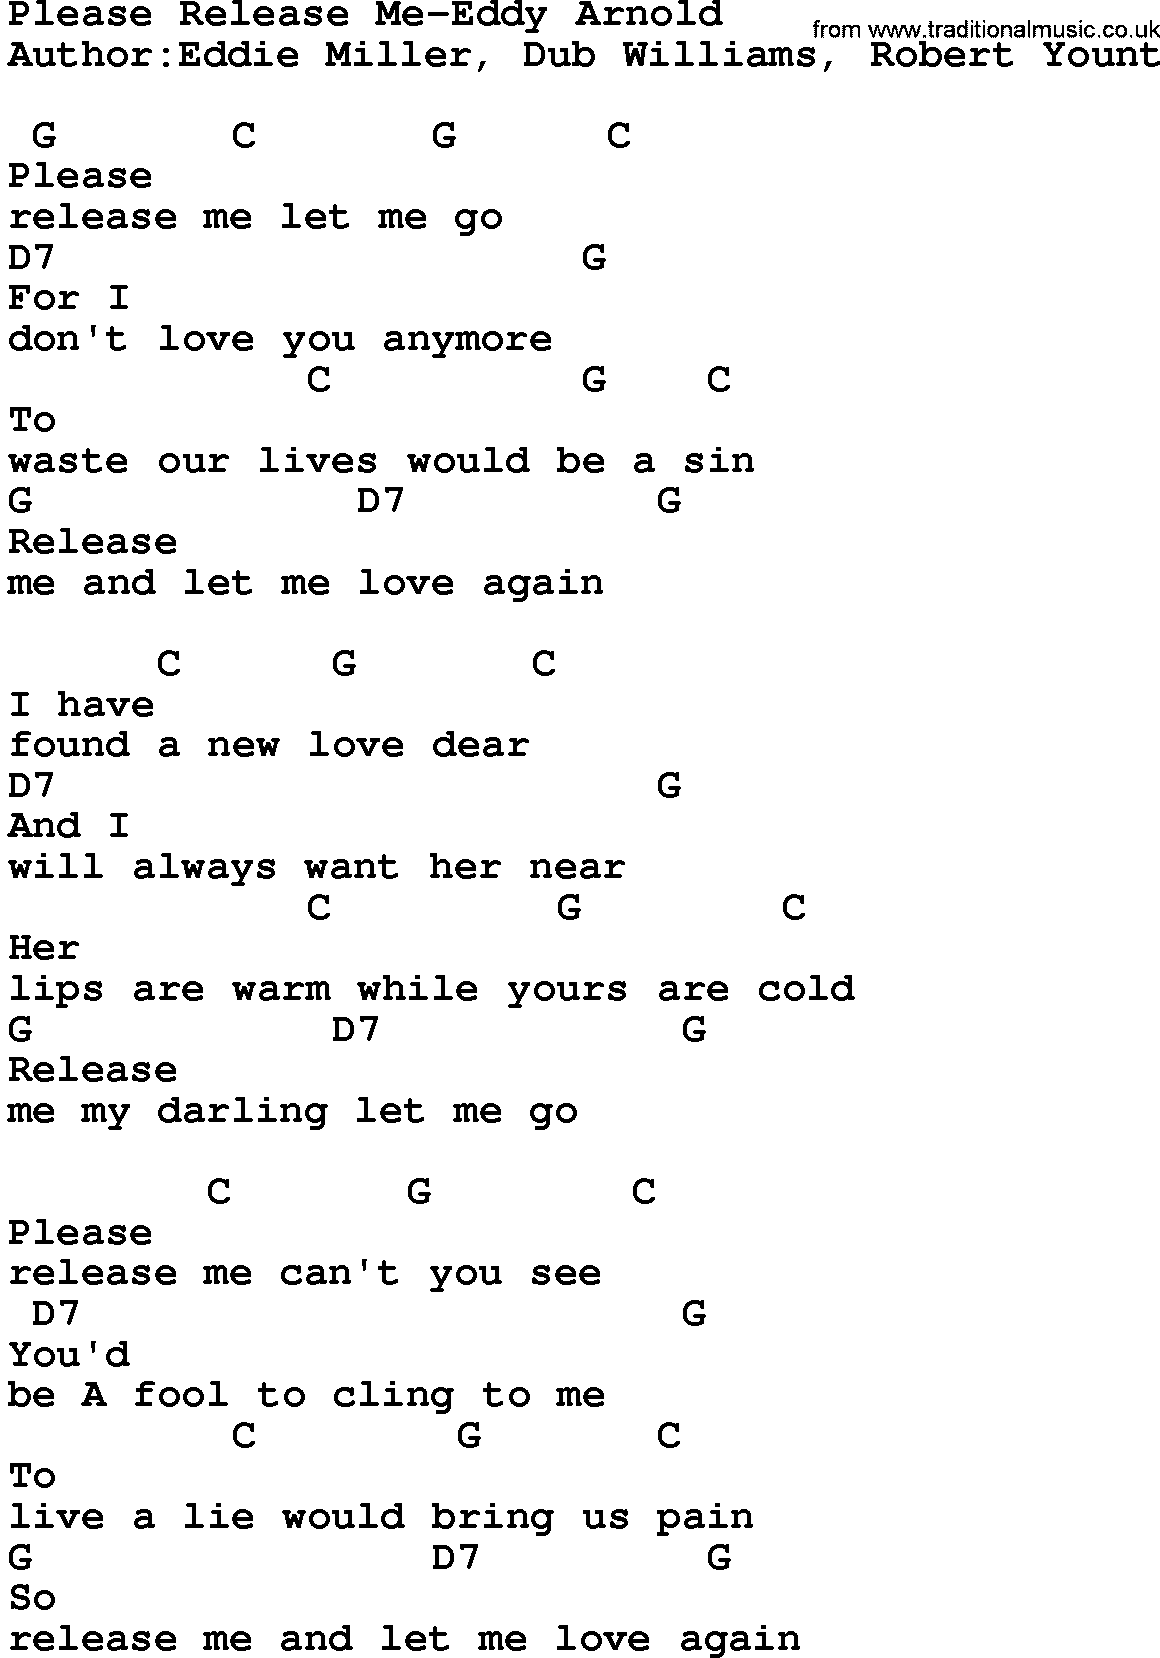 Country music song: Please Release Me-Eddy Arnold lyrics and chords